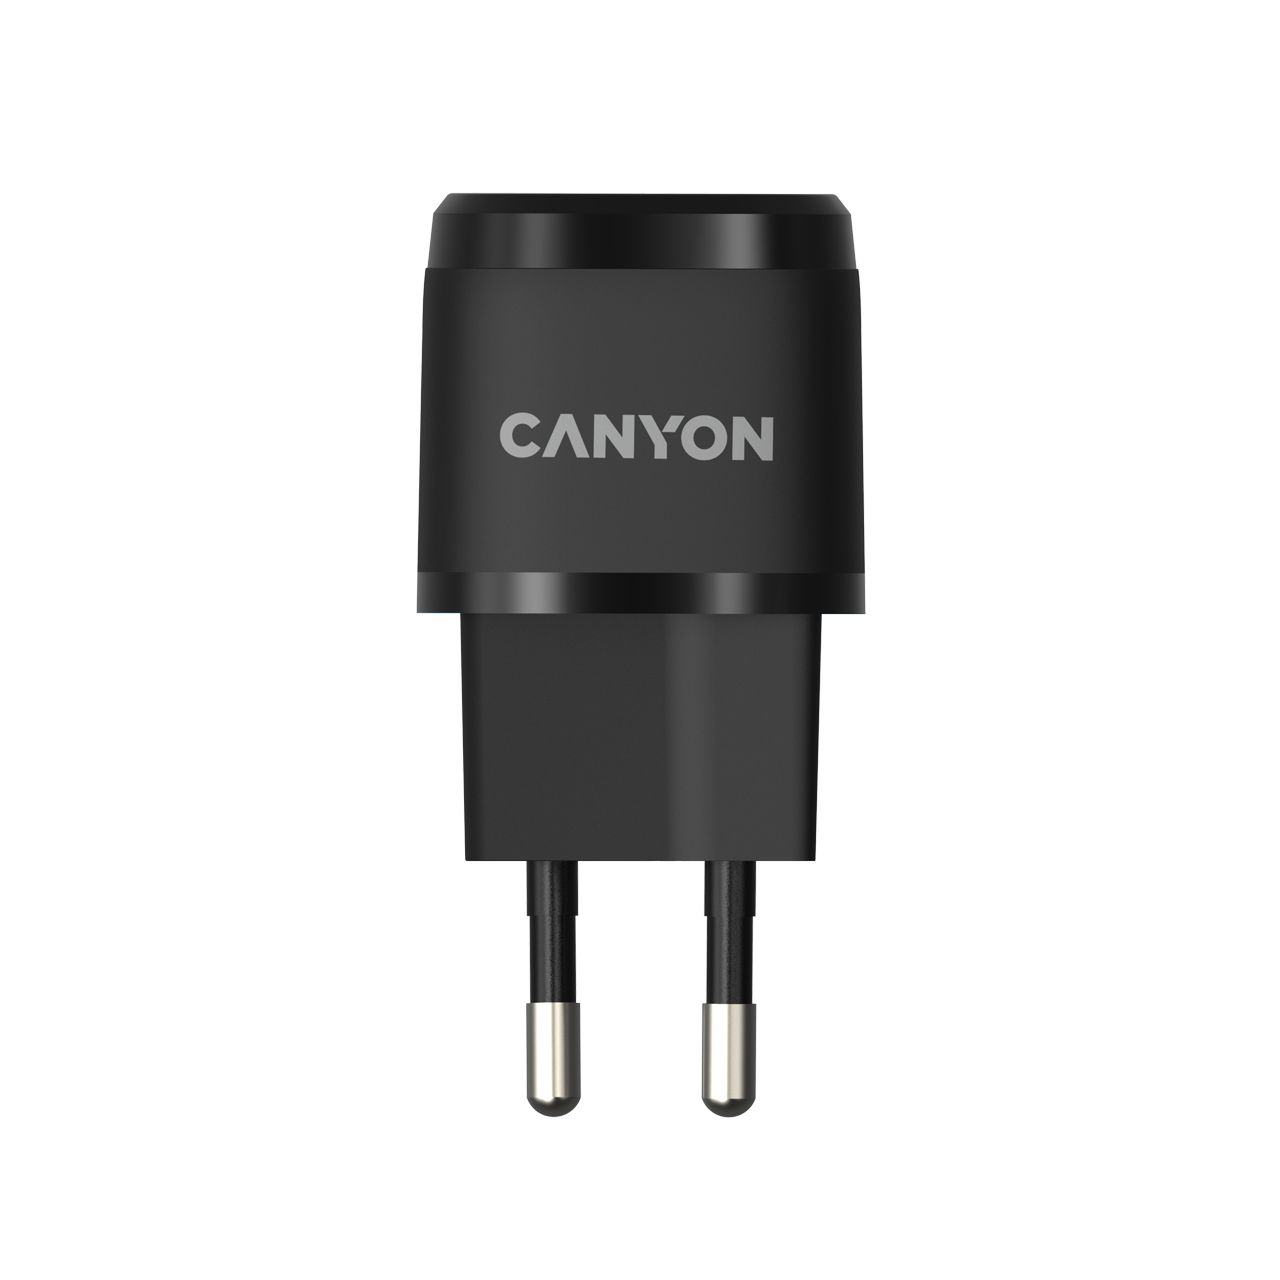 Canyon, PD 20W Input: 100V-240V, Output: 1 port charge: USB-C:PD 20W (5V3A/9V2.22A/12V1.66A) , Eu plug, Over- Voltage ,  over-heated, over-current and short circuit protection Compliant with CE RoHs,ERP. Size: 68.5*29.2*29.4mm, 32.5g, Black_1